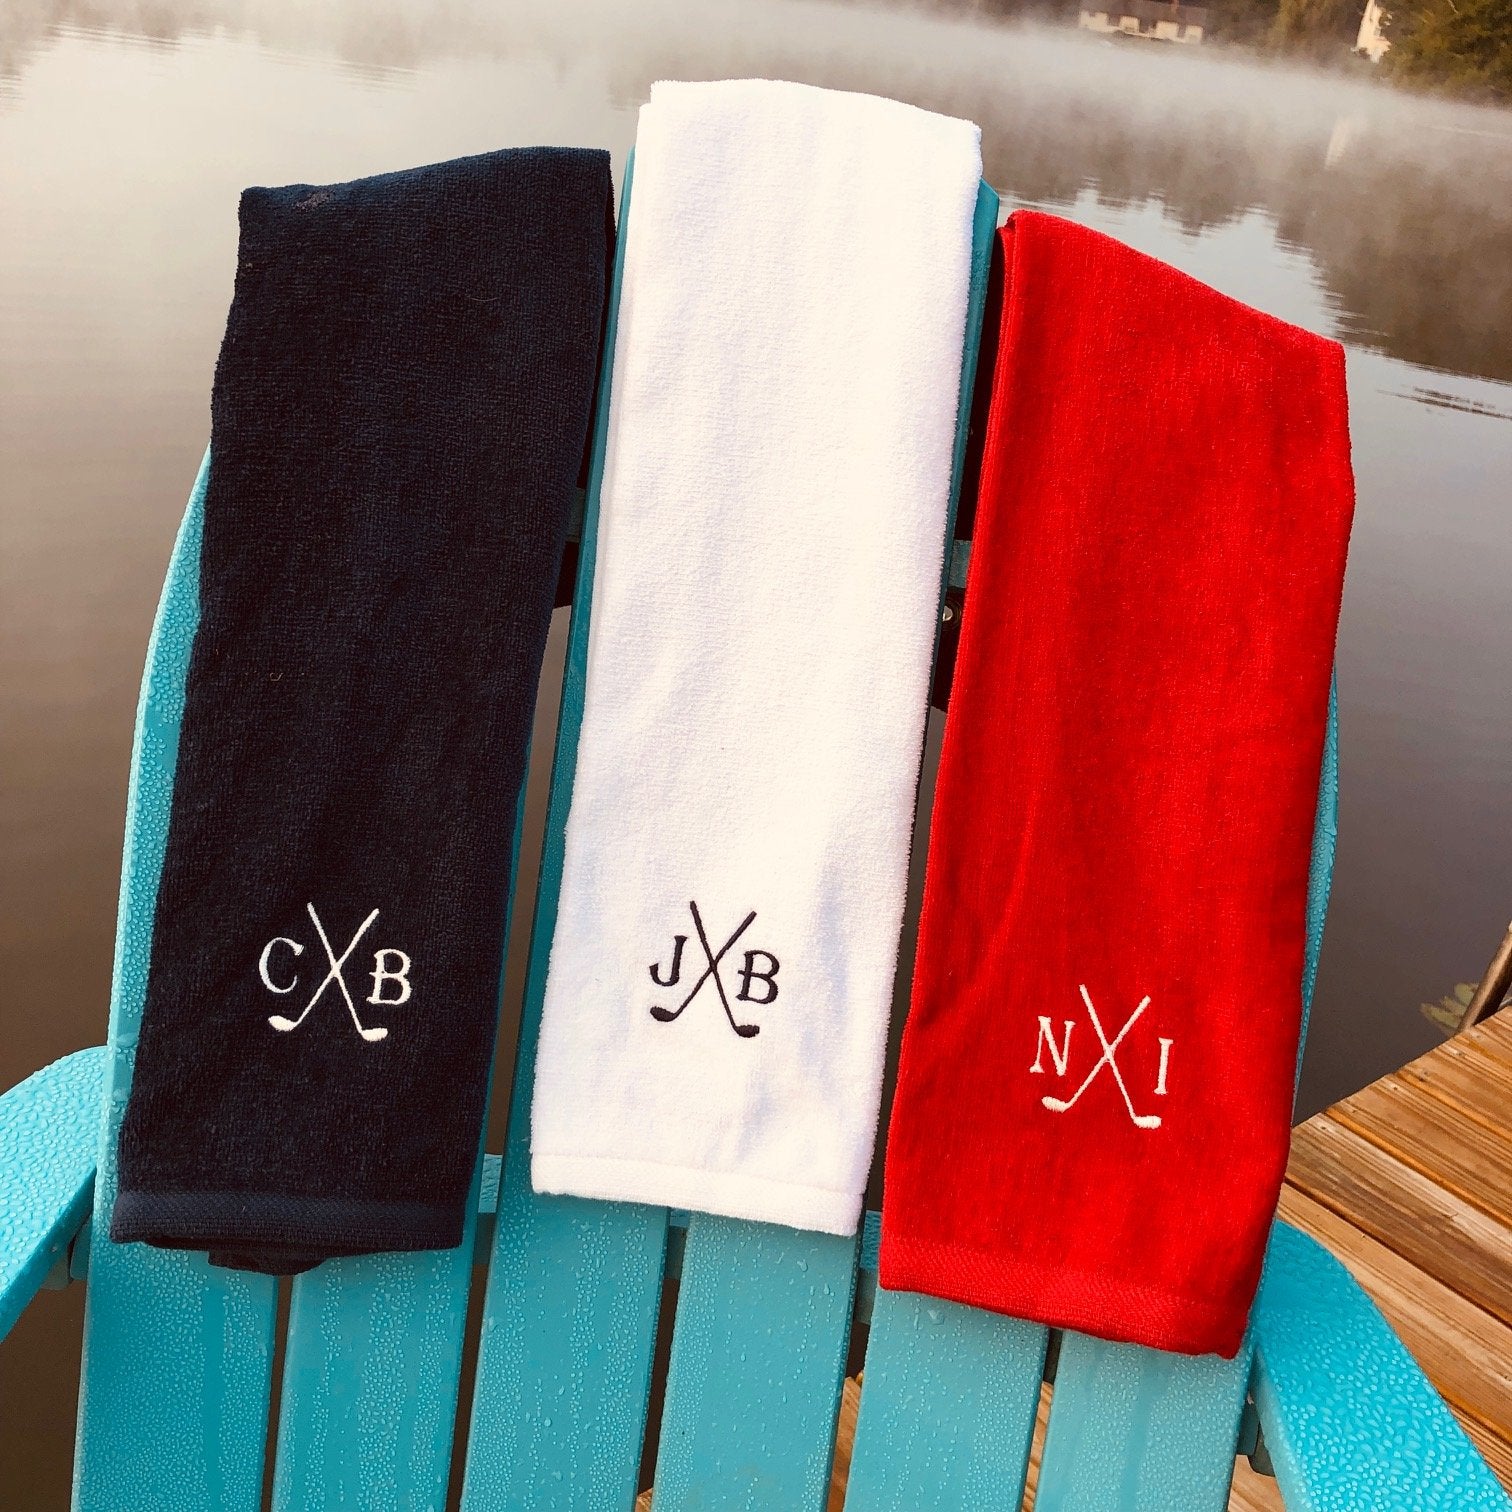 Personalized Towels Personalized Hand Towels Burgundy 